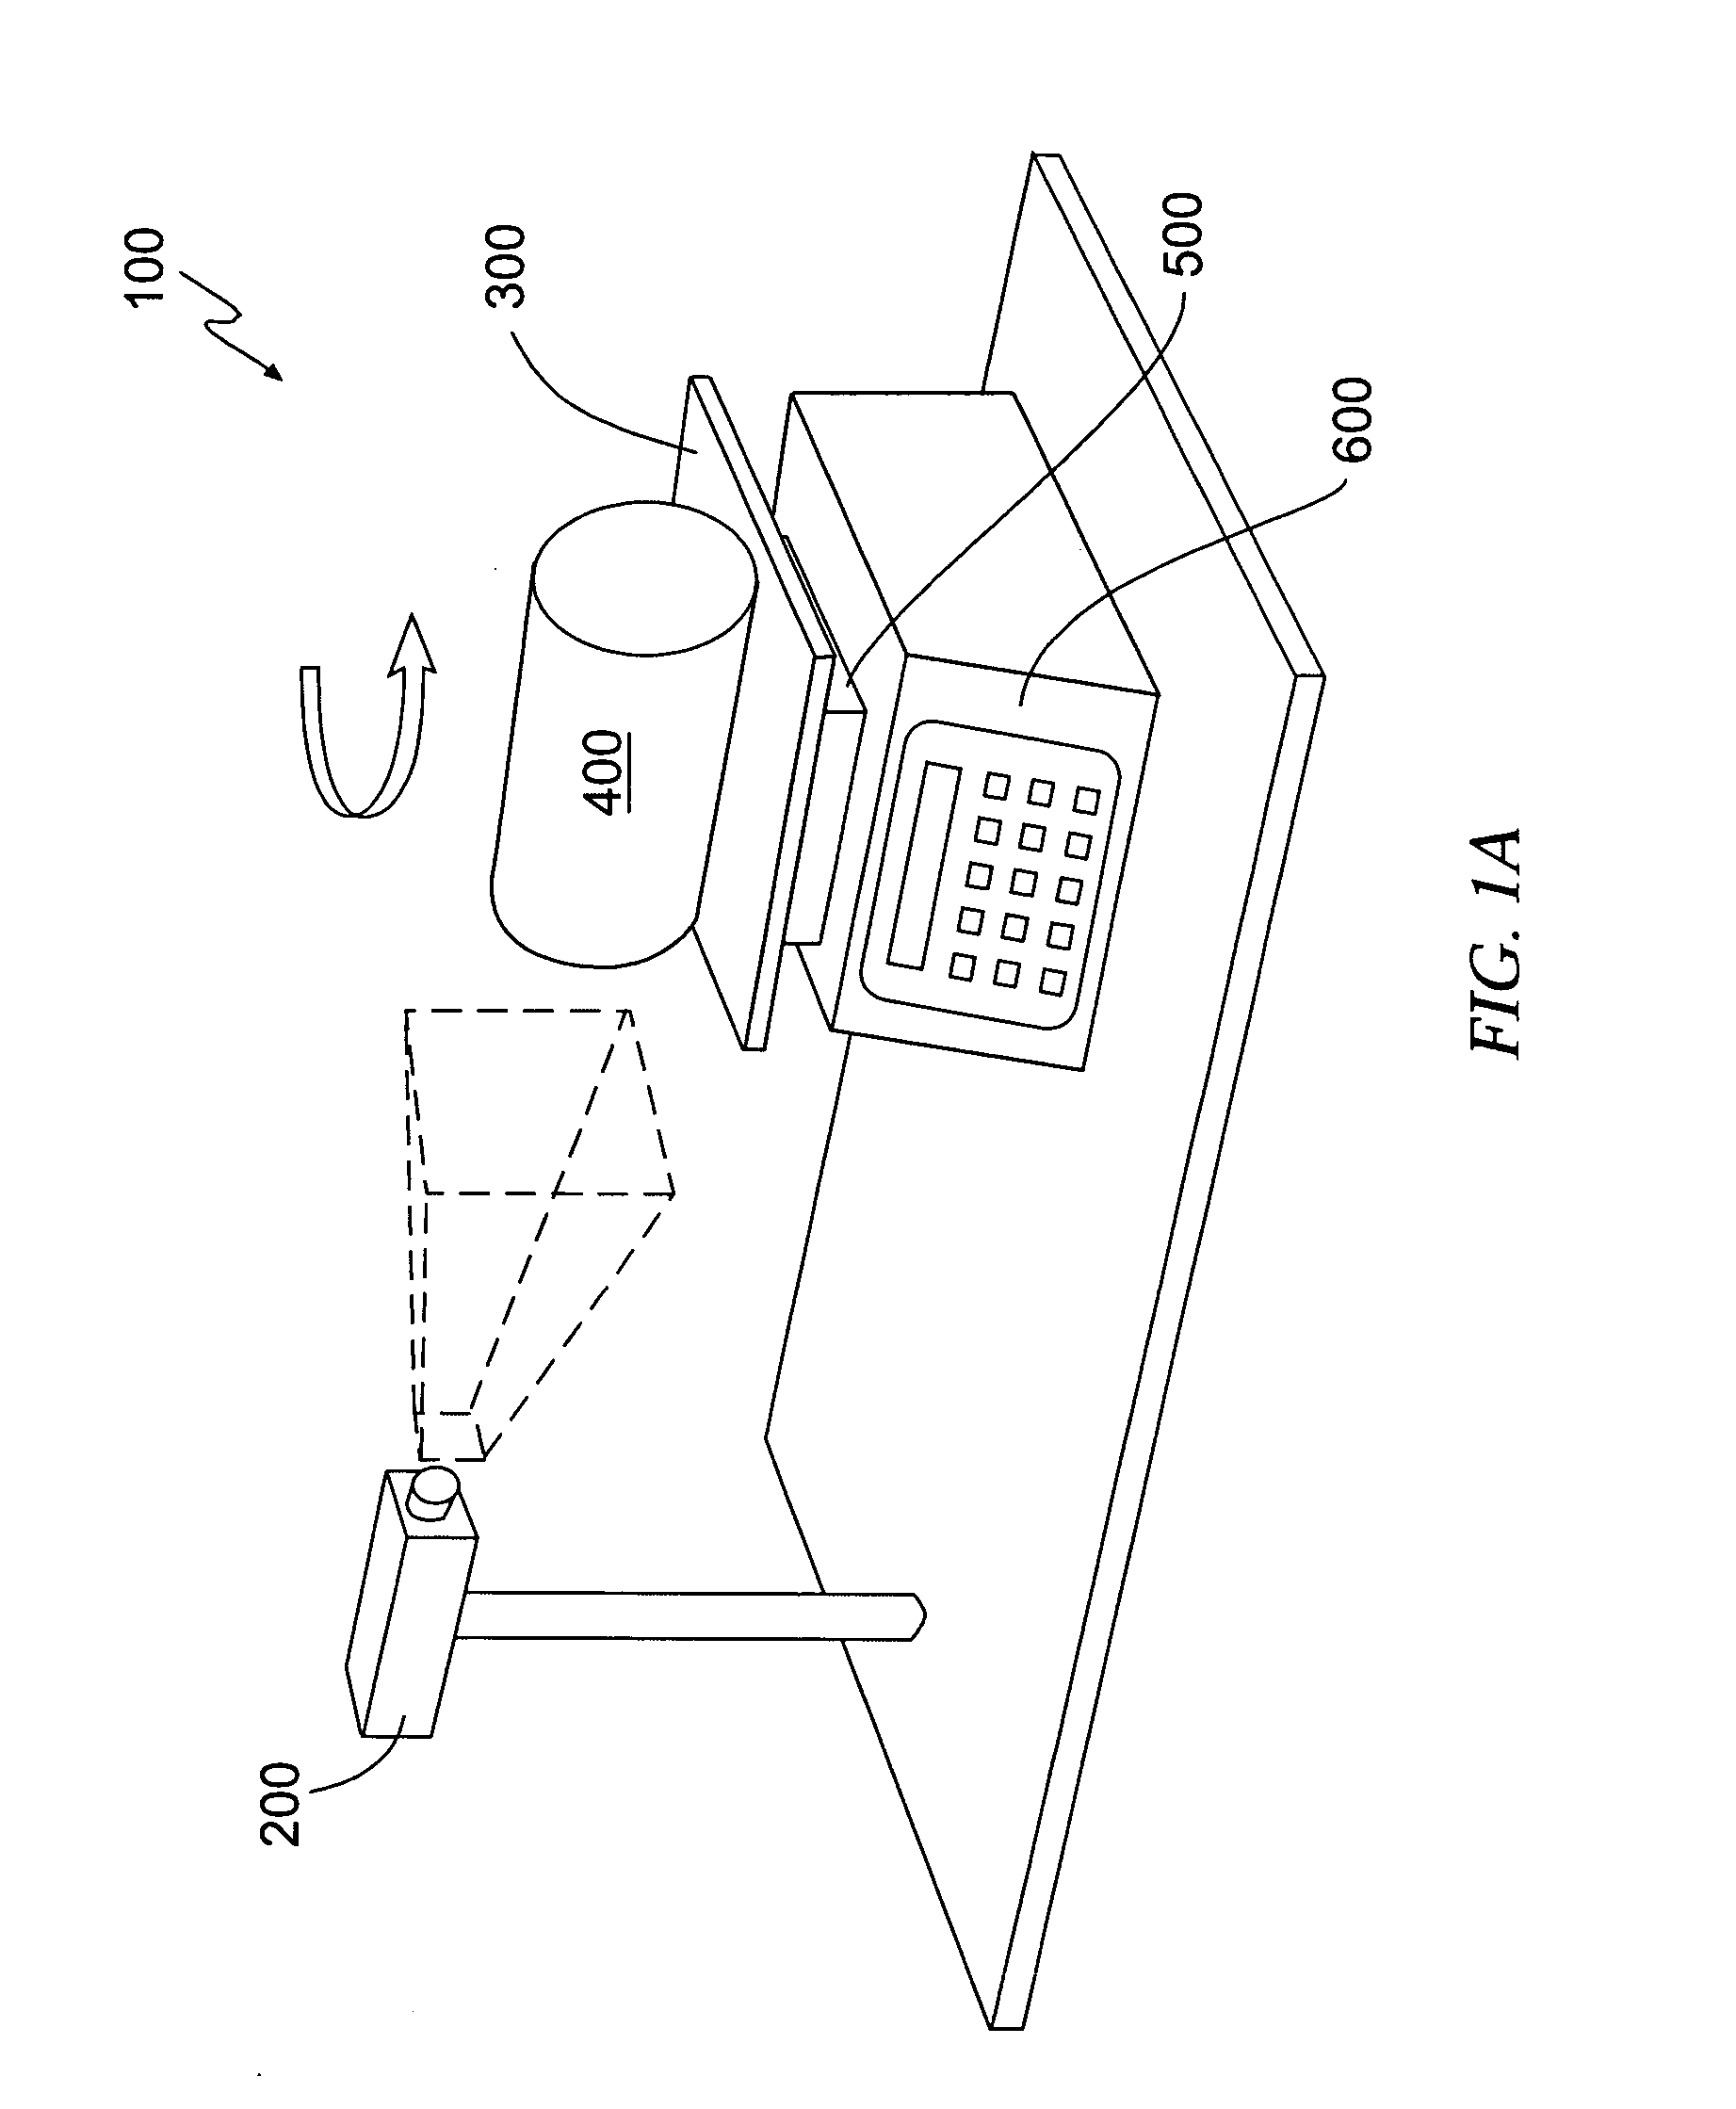 Method of determining a dimension of a sample of a construction material and associated apparatus